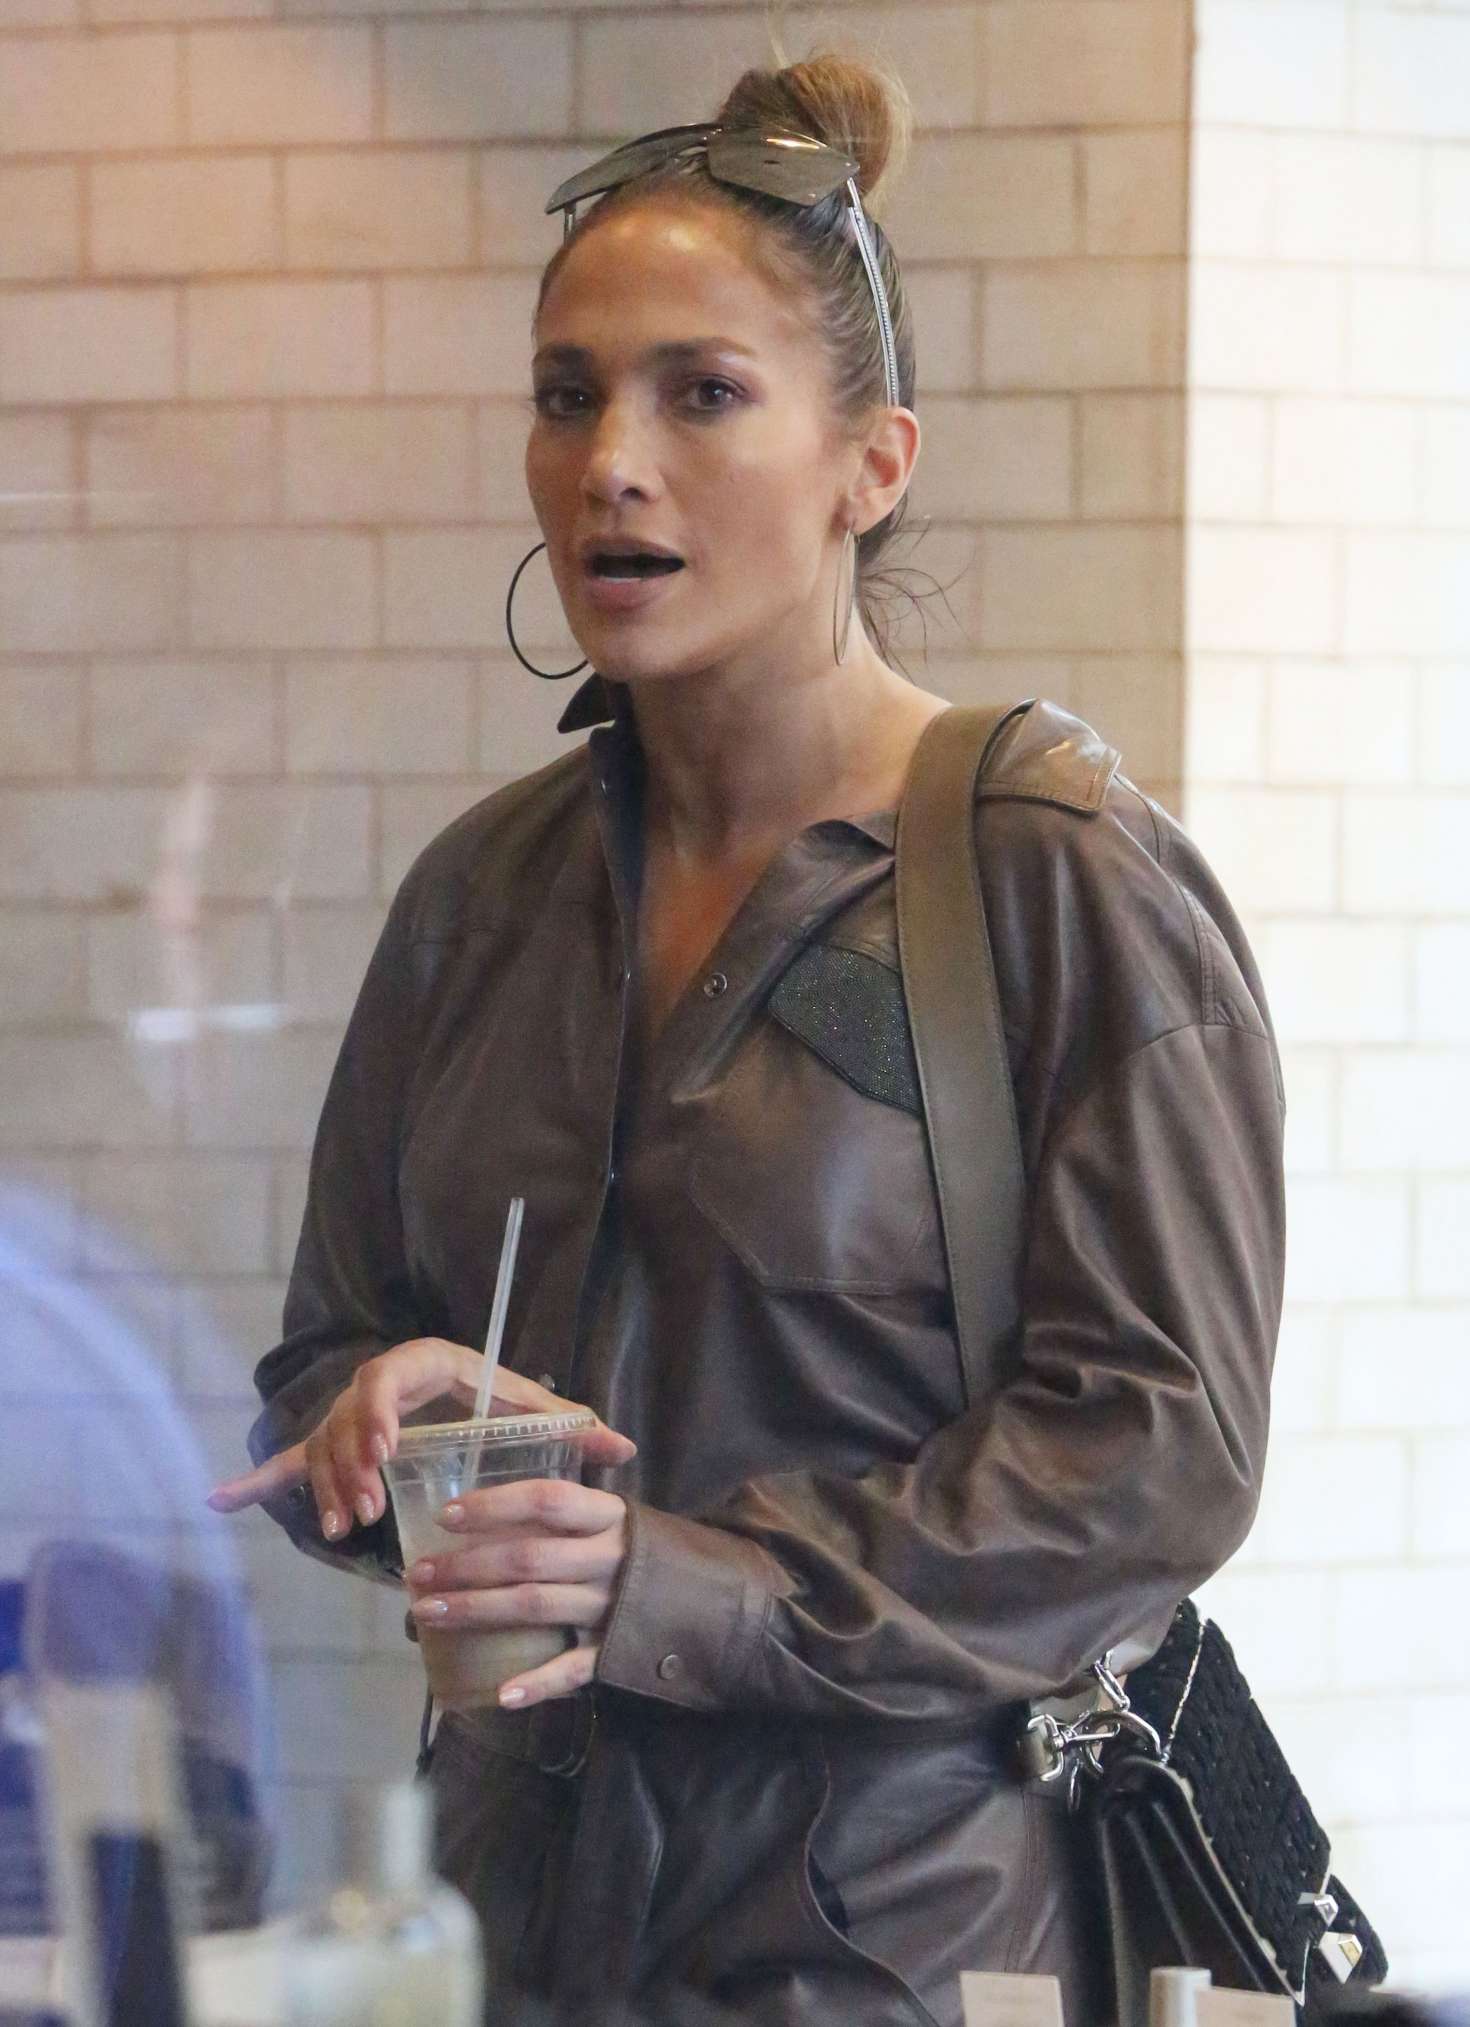 Jennifer Lopez in Leather Jumpsuit â€“ Shopping in Beverly Hills